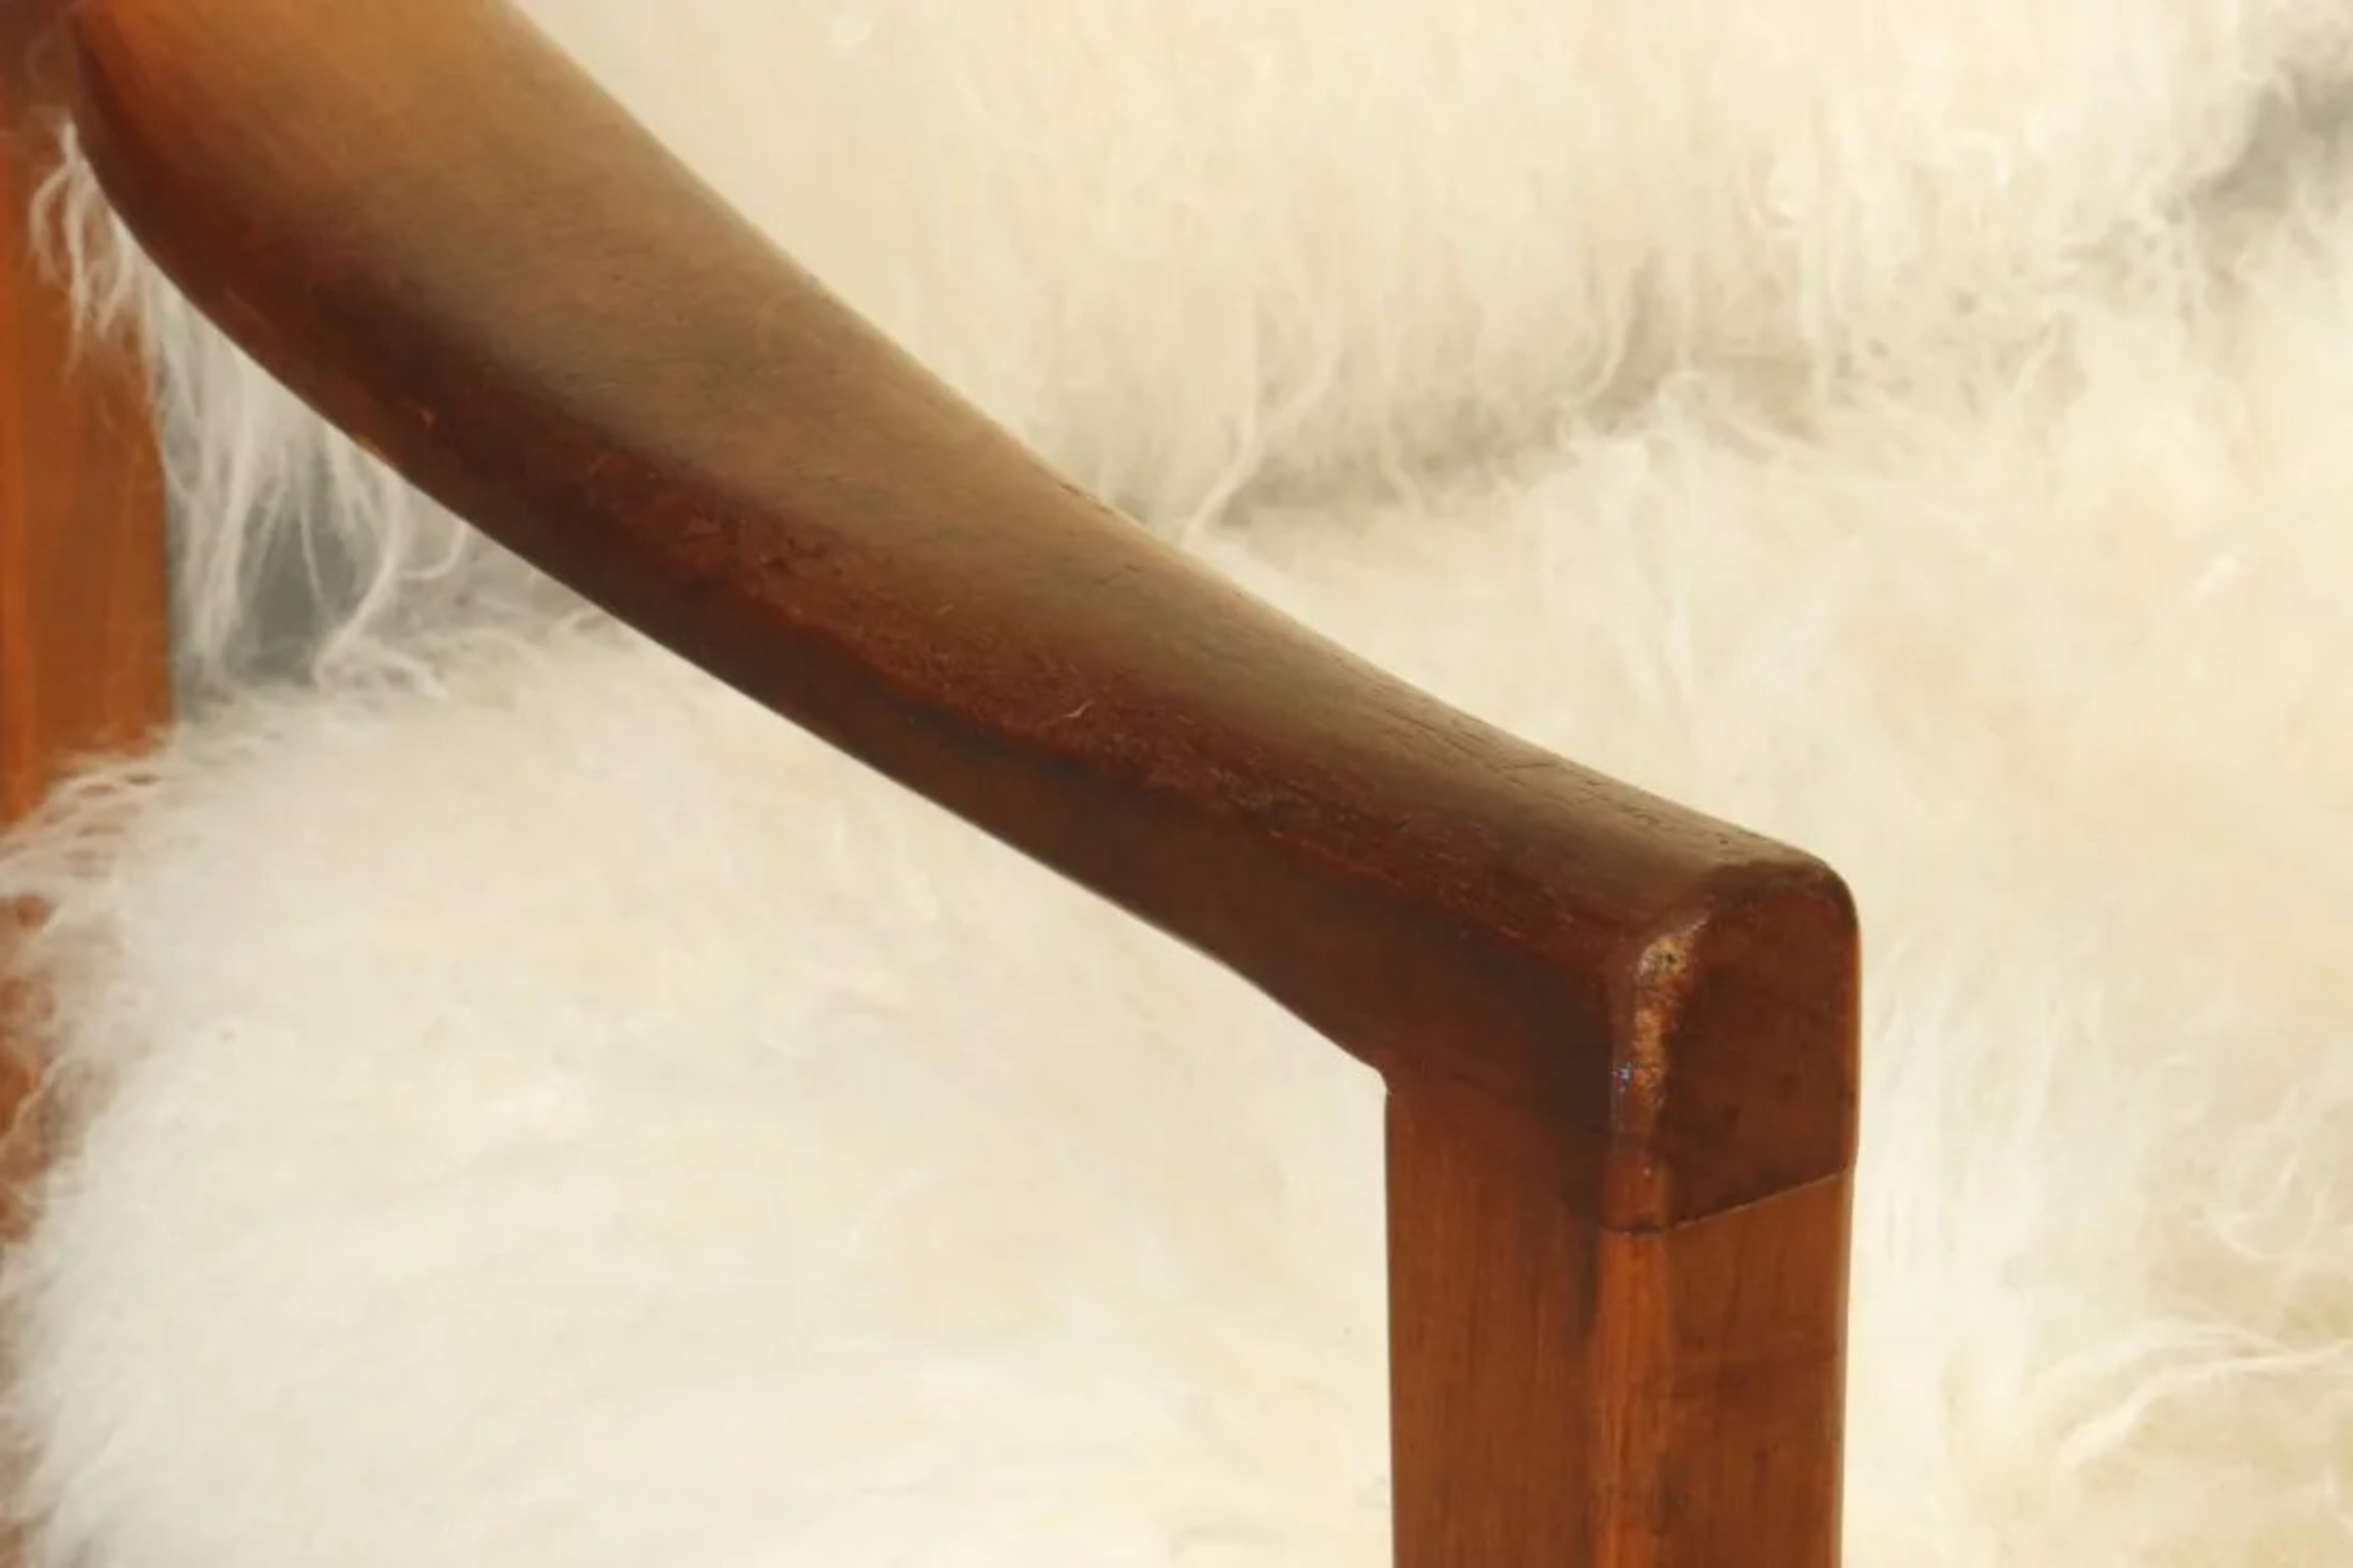 Mid-Century Teak Arm Chair With Mongolian Fur from 1970s
In very good condition considering age and use 